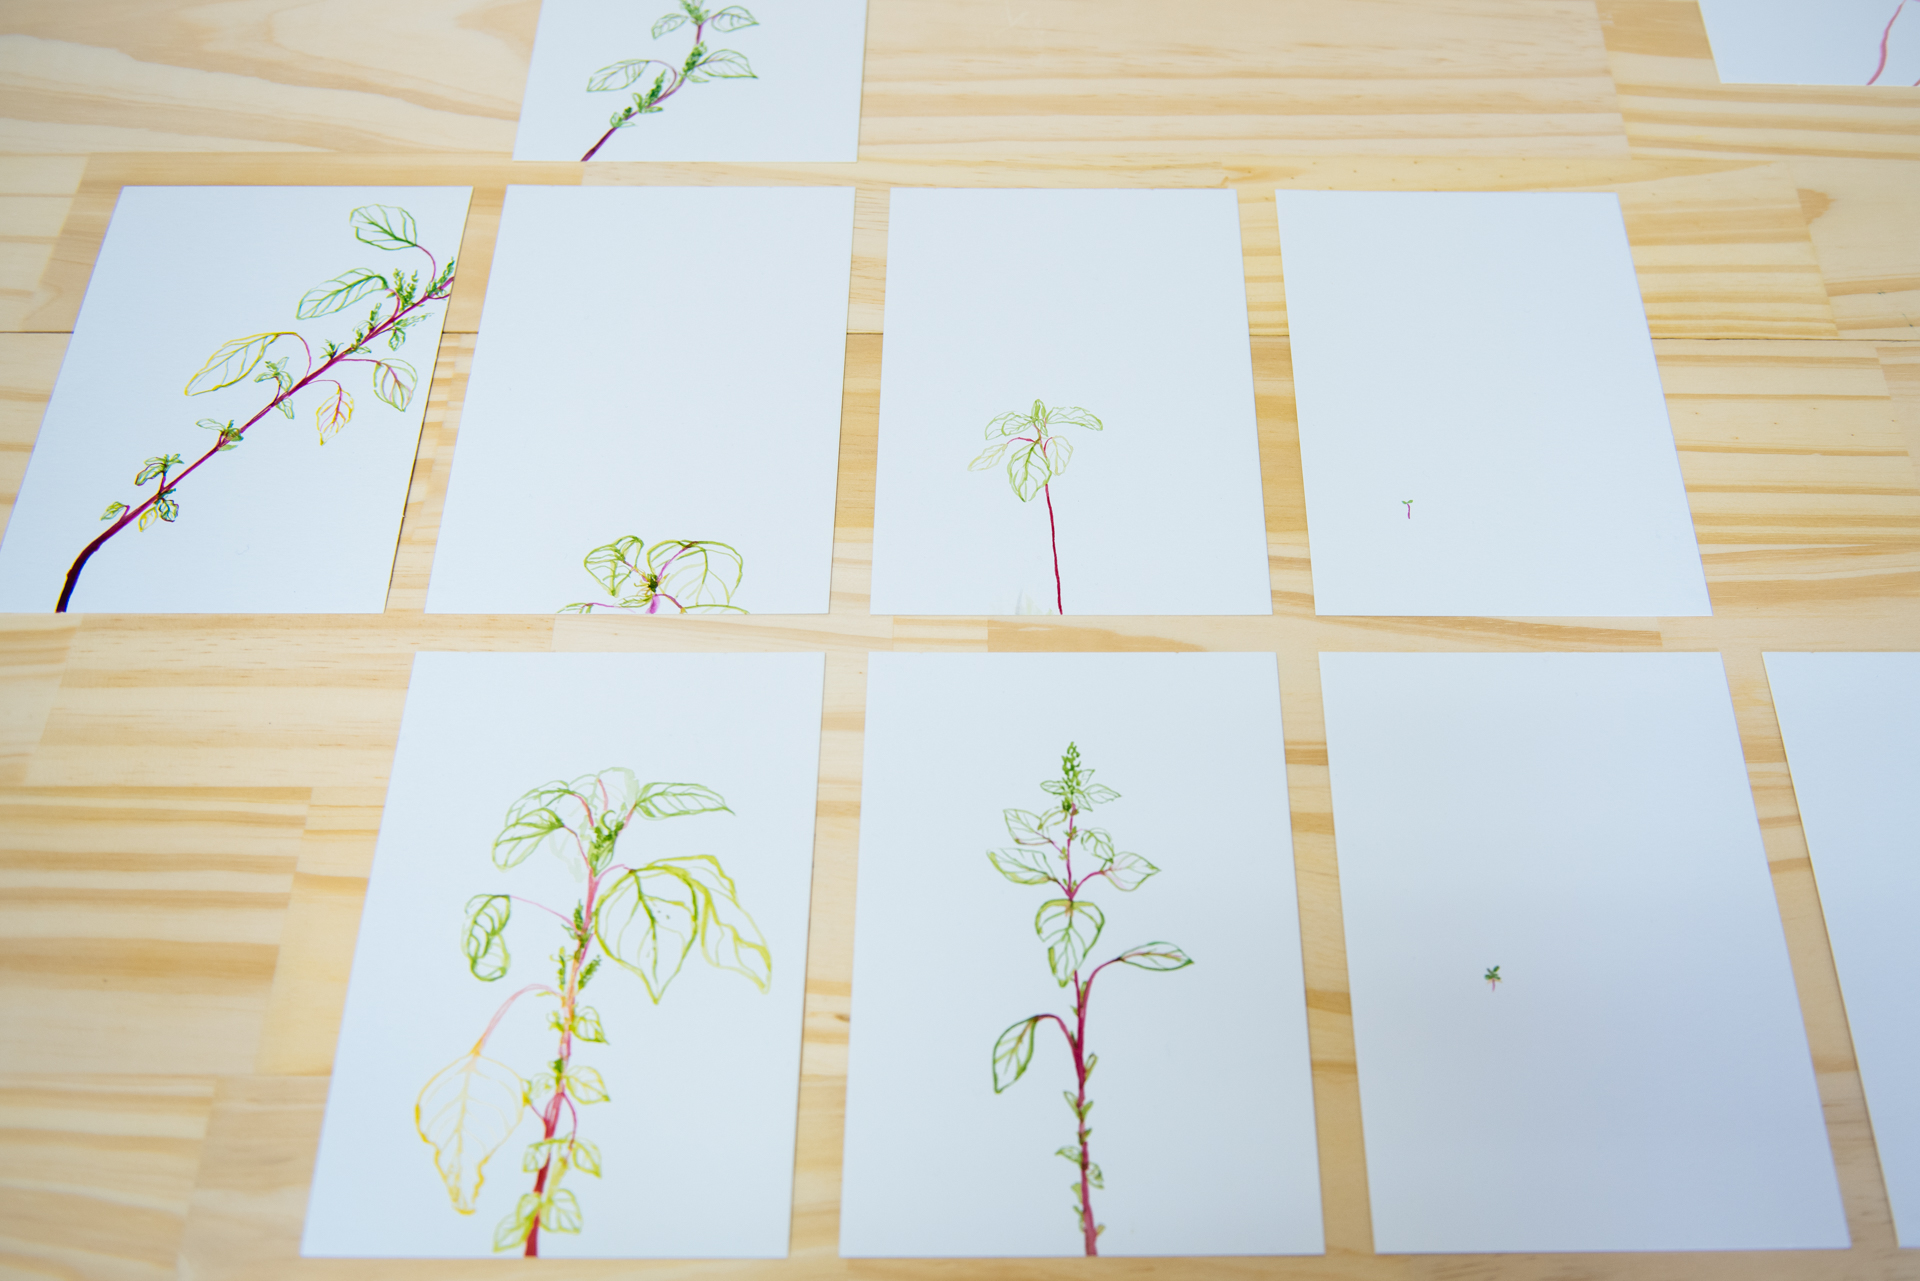 Field Drawings from Laboratory of Research in Plant Physiology and Molecular Biology at the National University of Litoral, Esperanza, Santa Fe Province